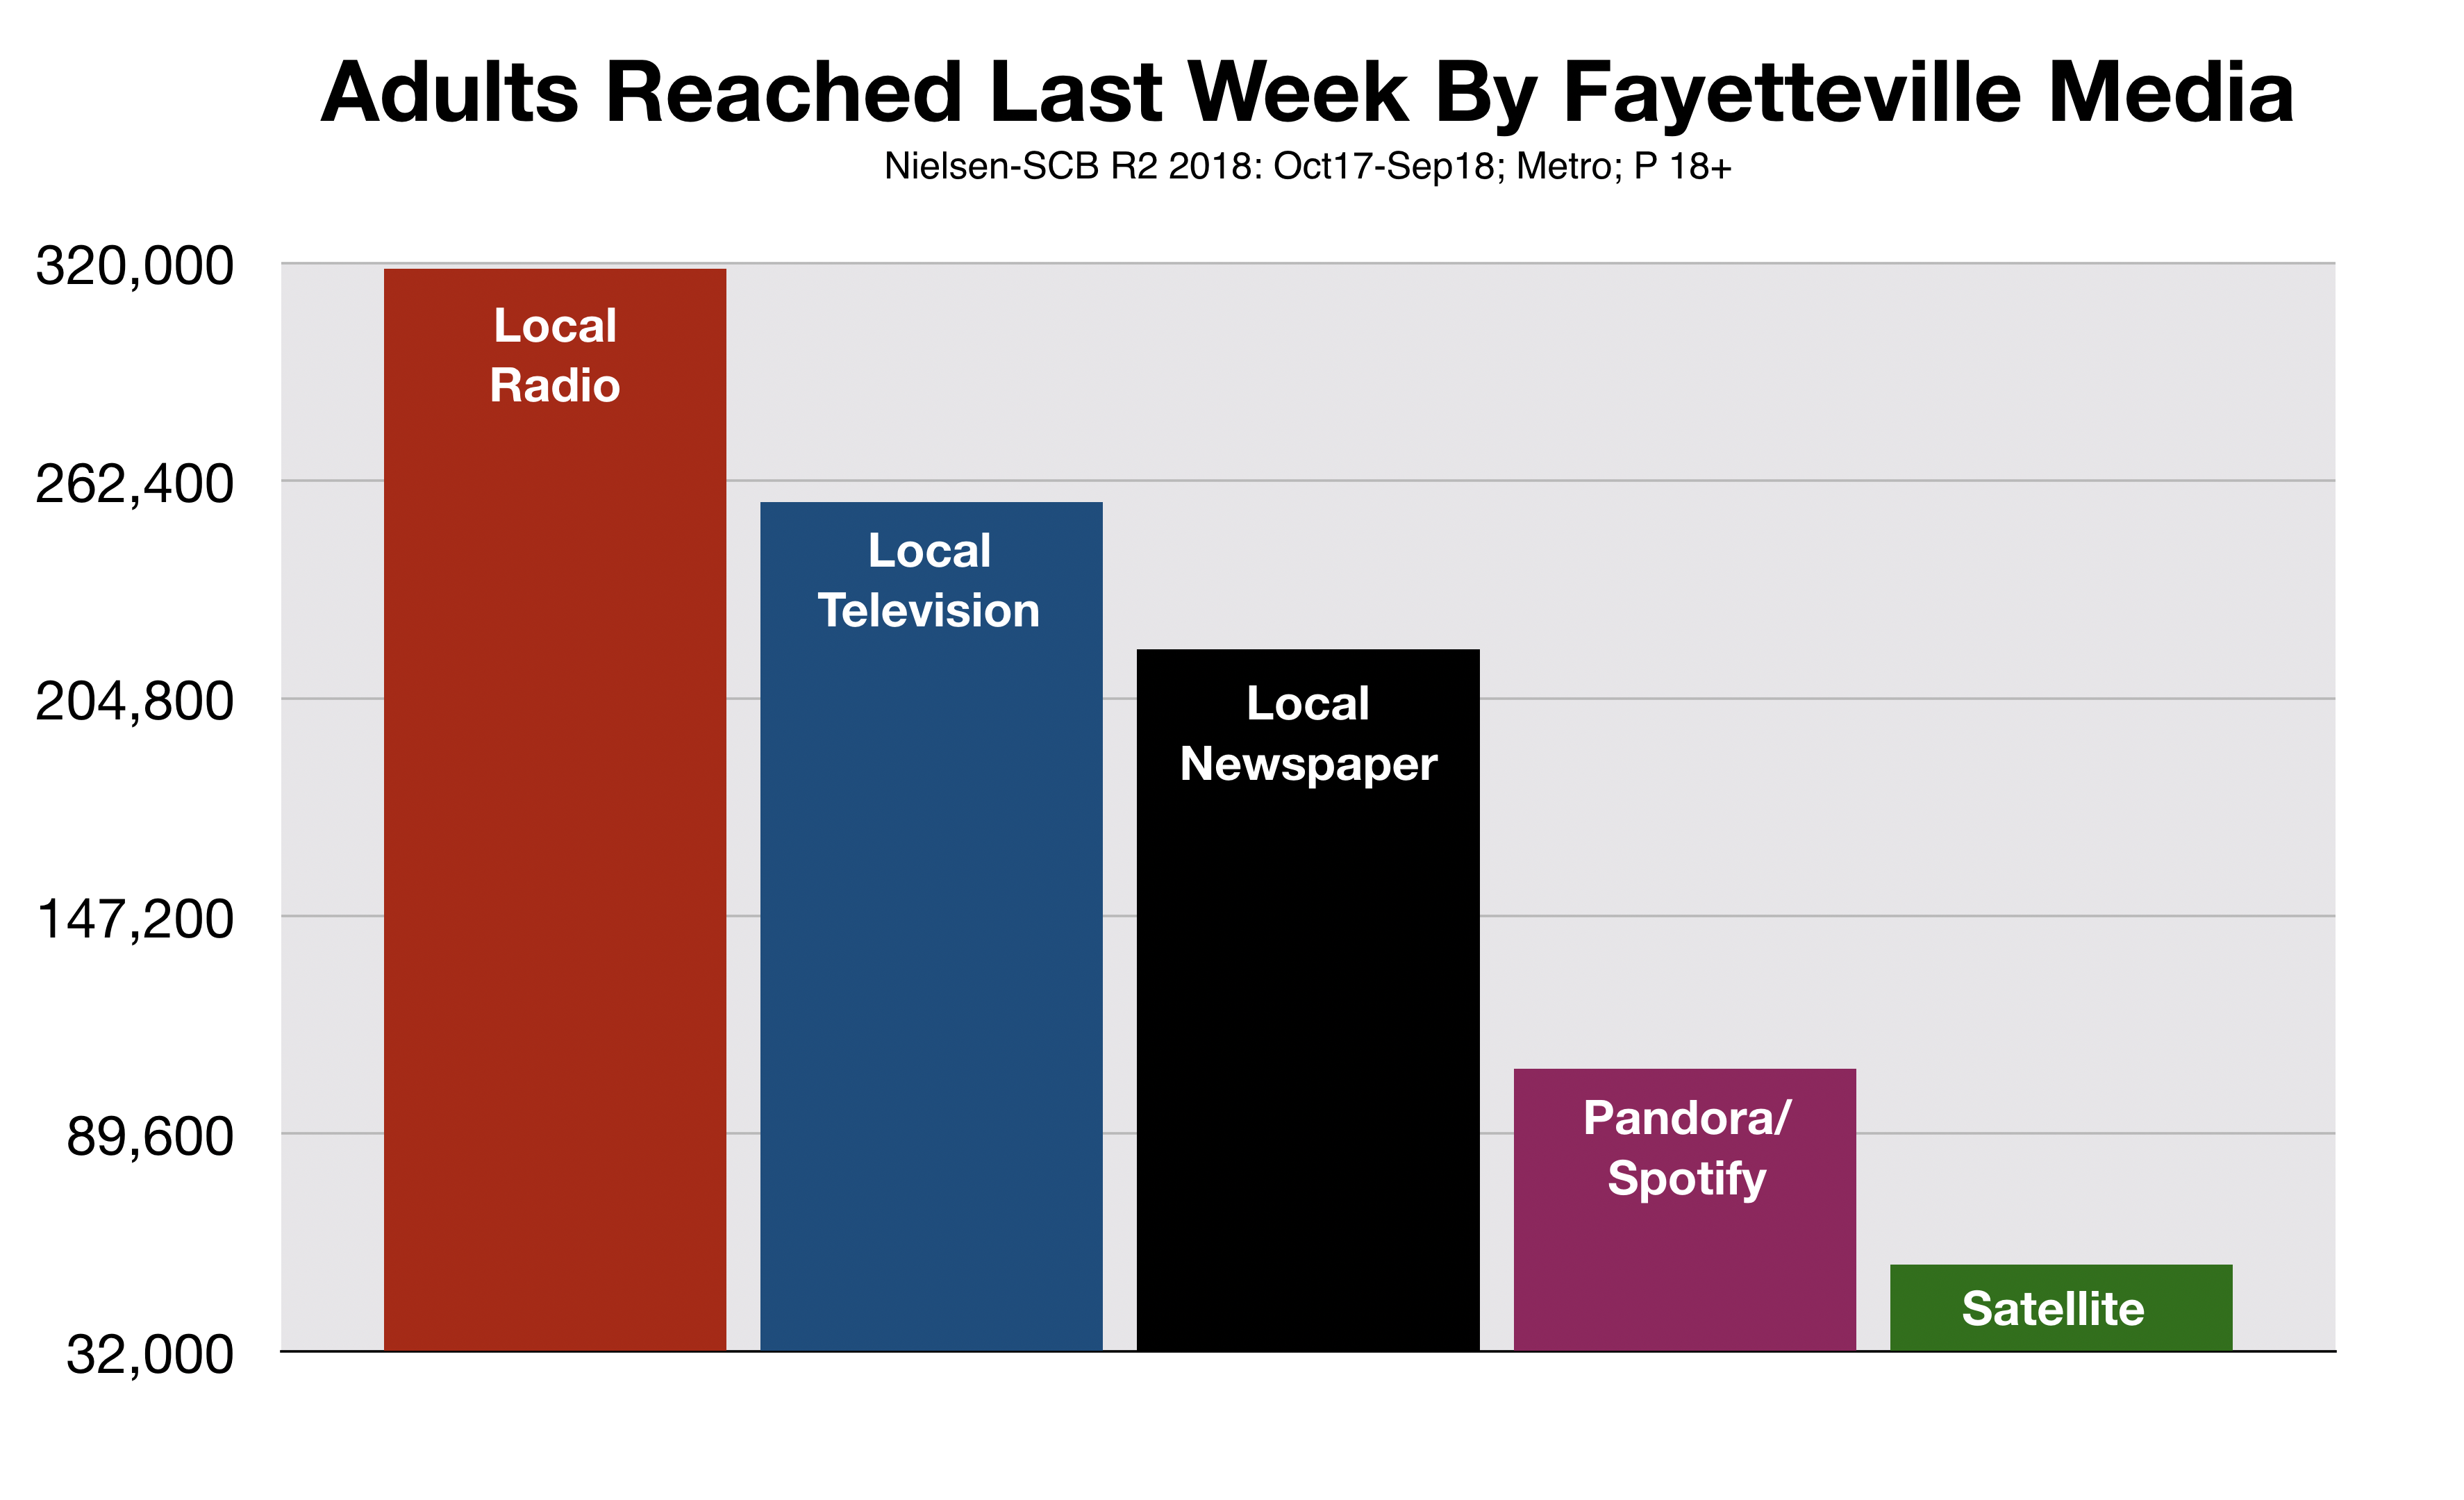 Fayetteville Media Reaching Including Sirius/XM